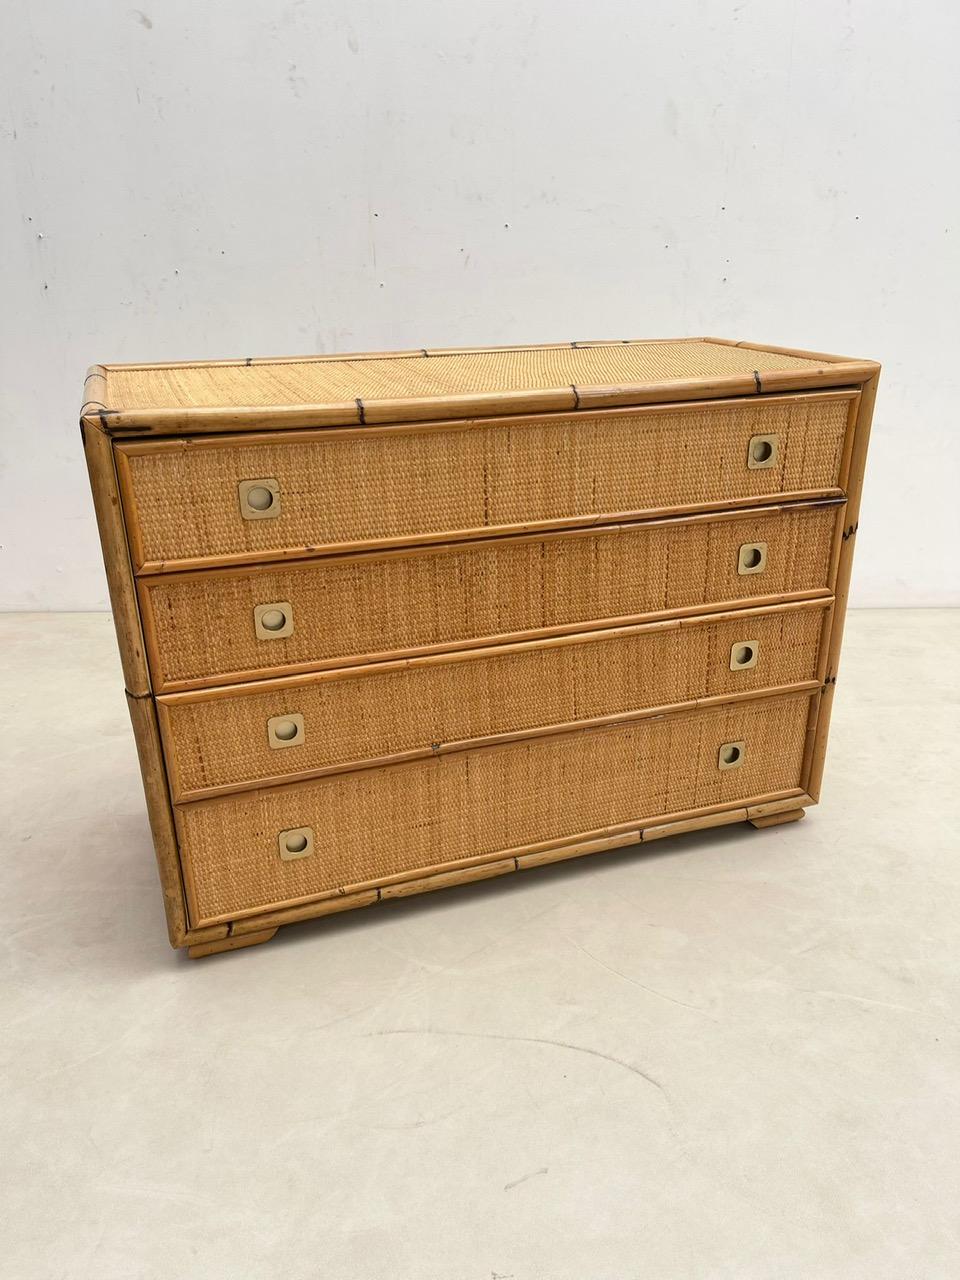 Dal Vera Bamboo and Wicker/Rattan Chest of Drawers, Italy 1960s For Sale 9